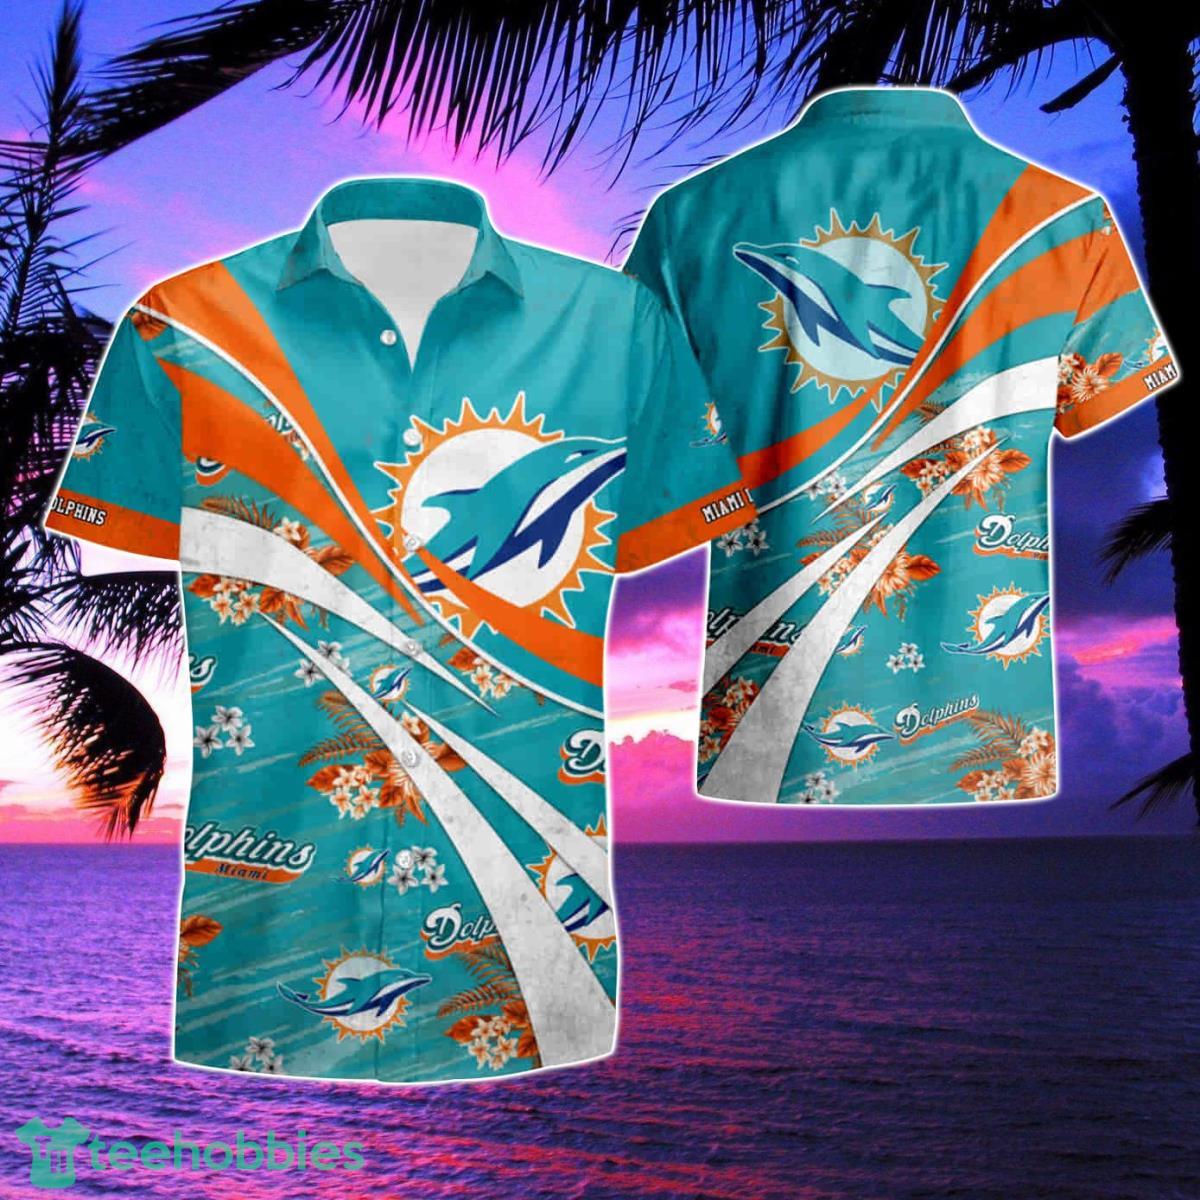 Miami Dolphins iconic jersey